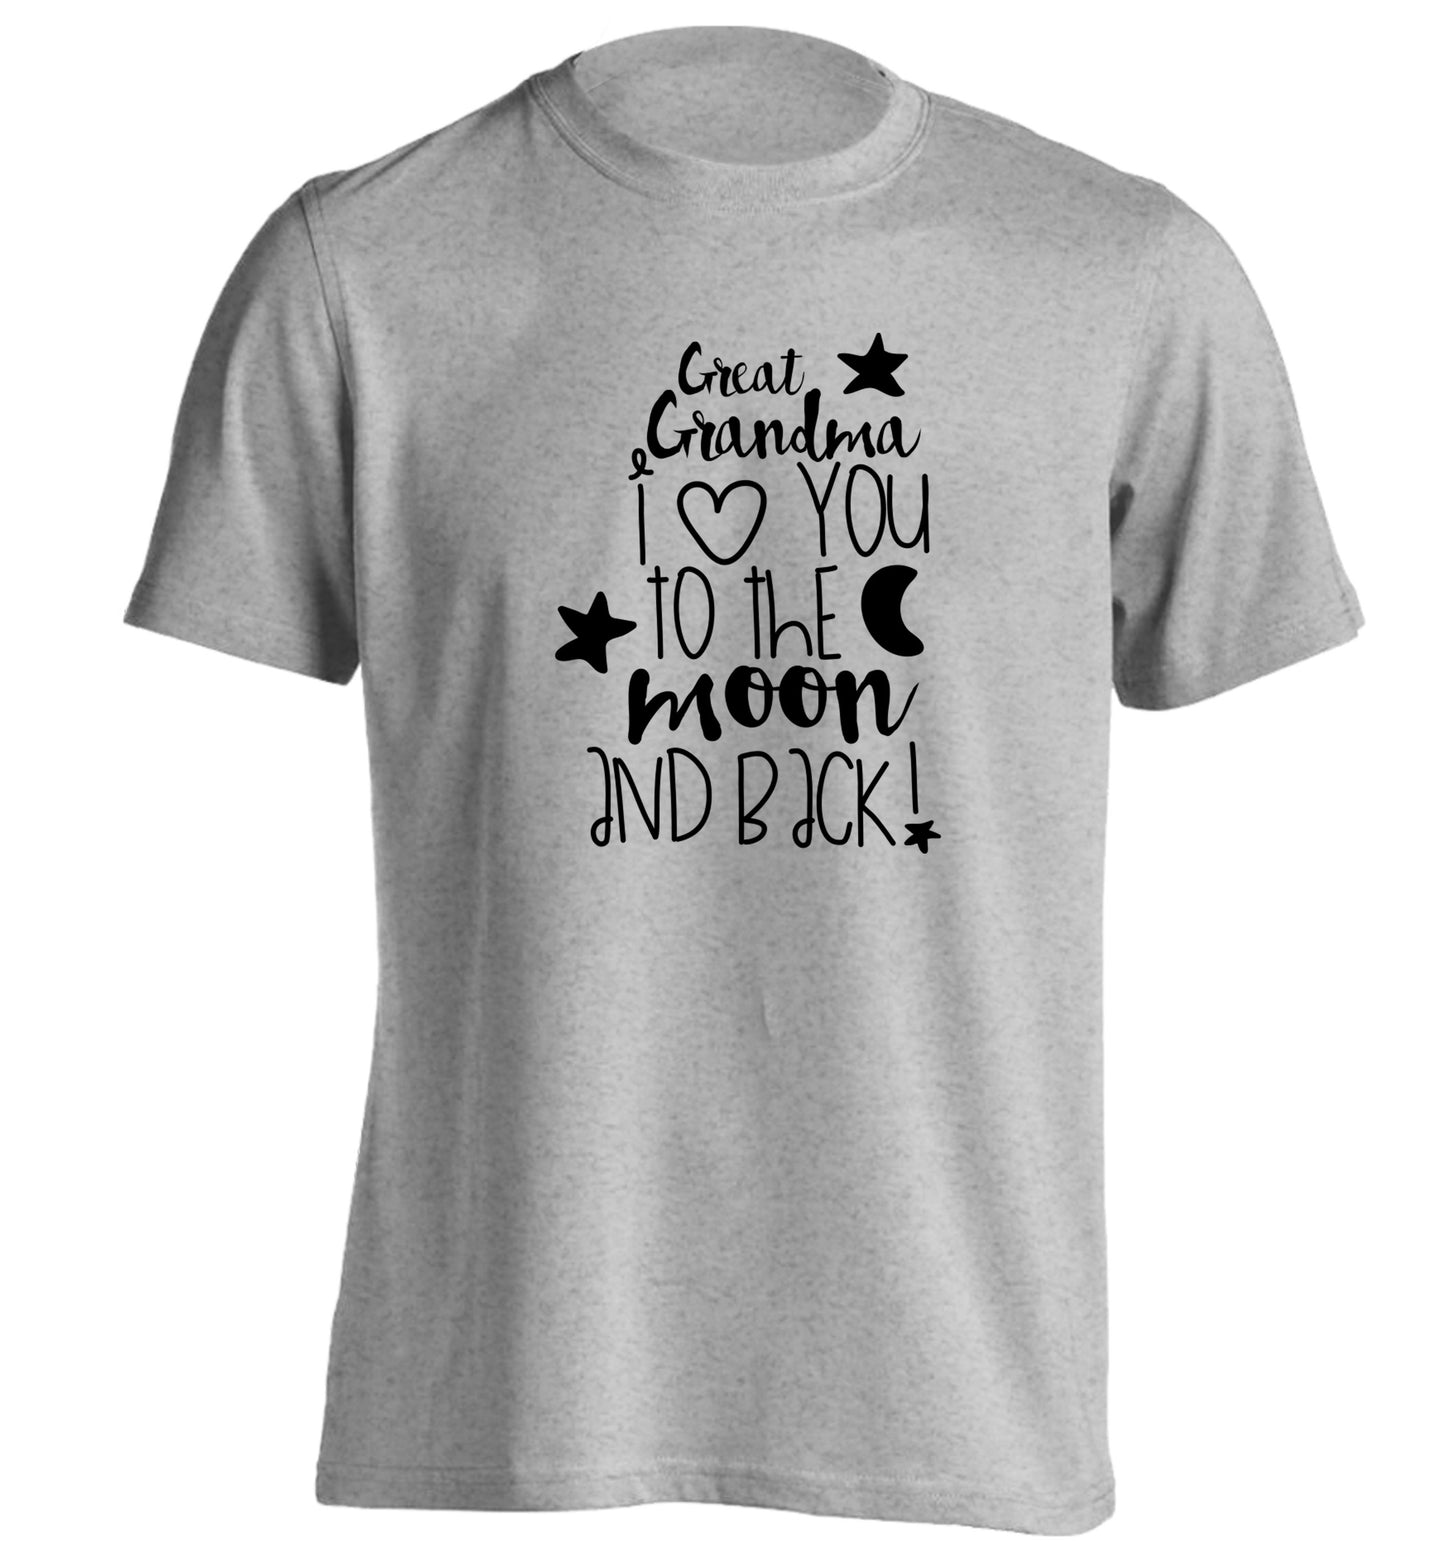 Great Grandma I love you to the moon and back adults unisex grey Tshirt 2XL